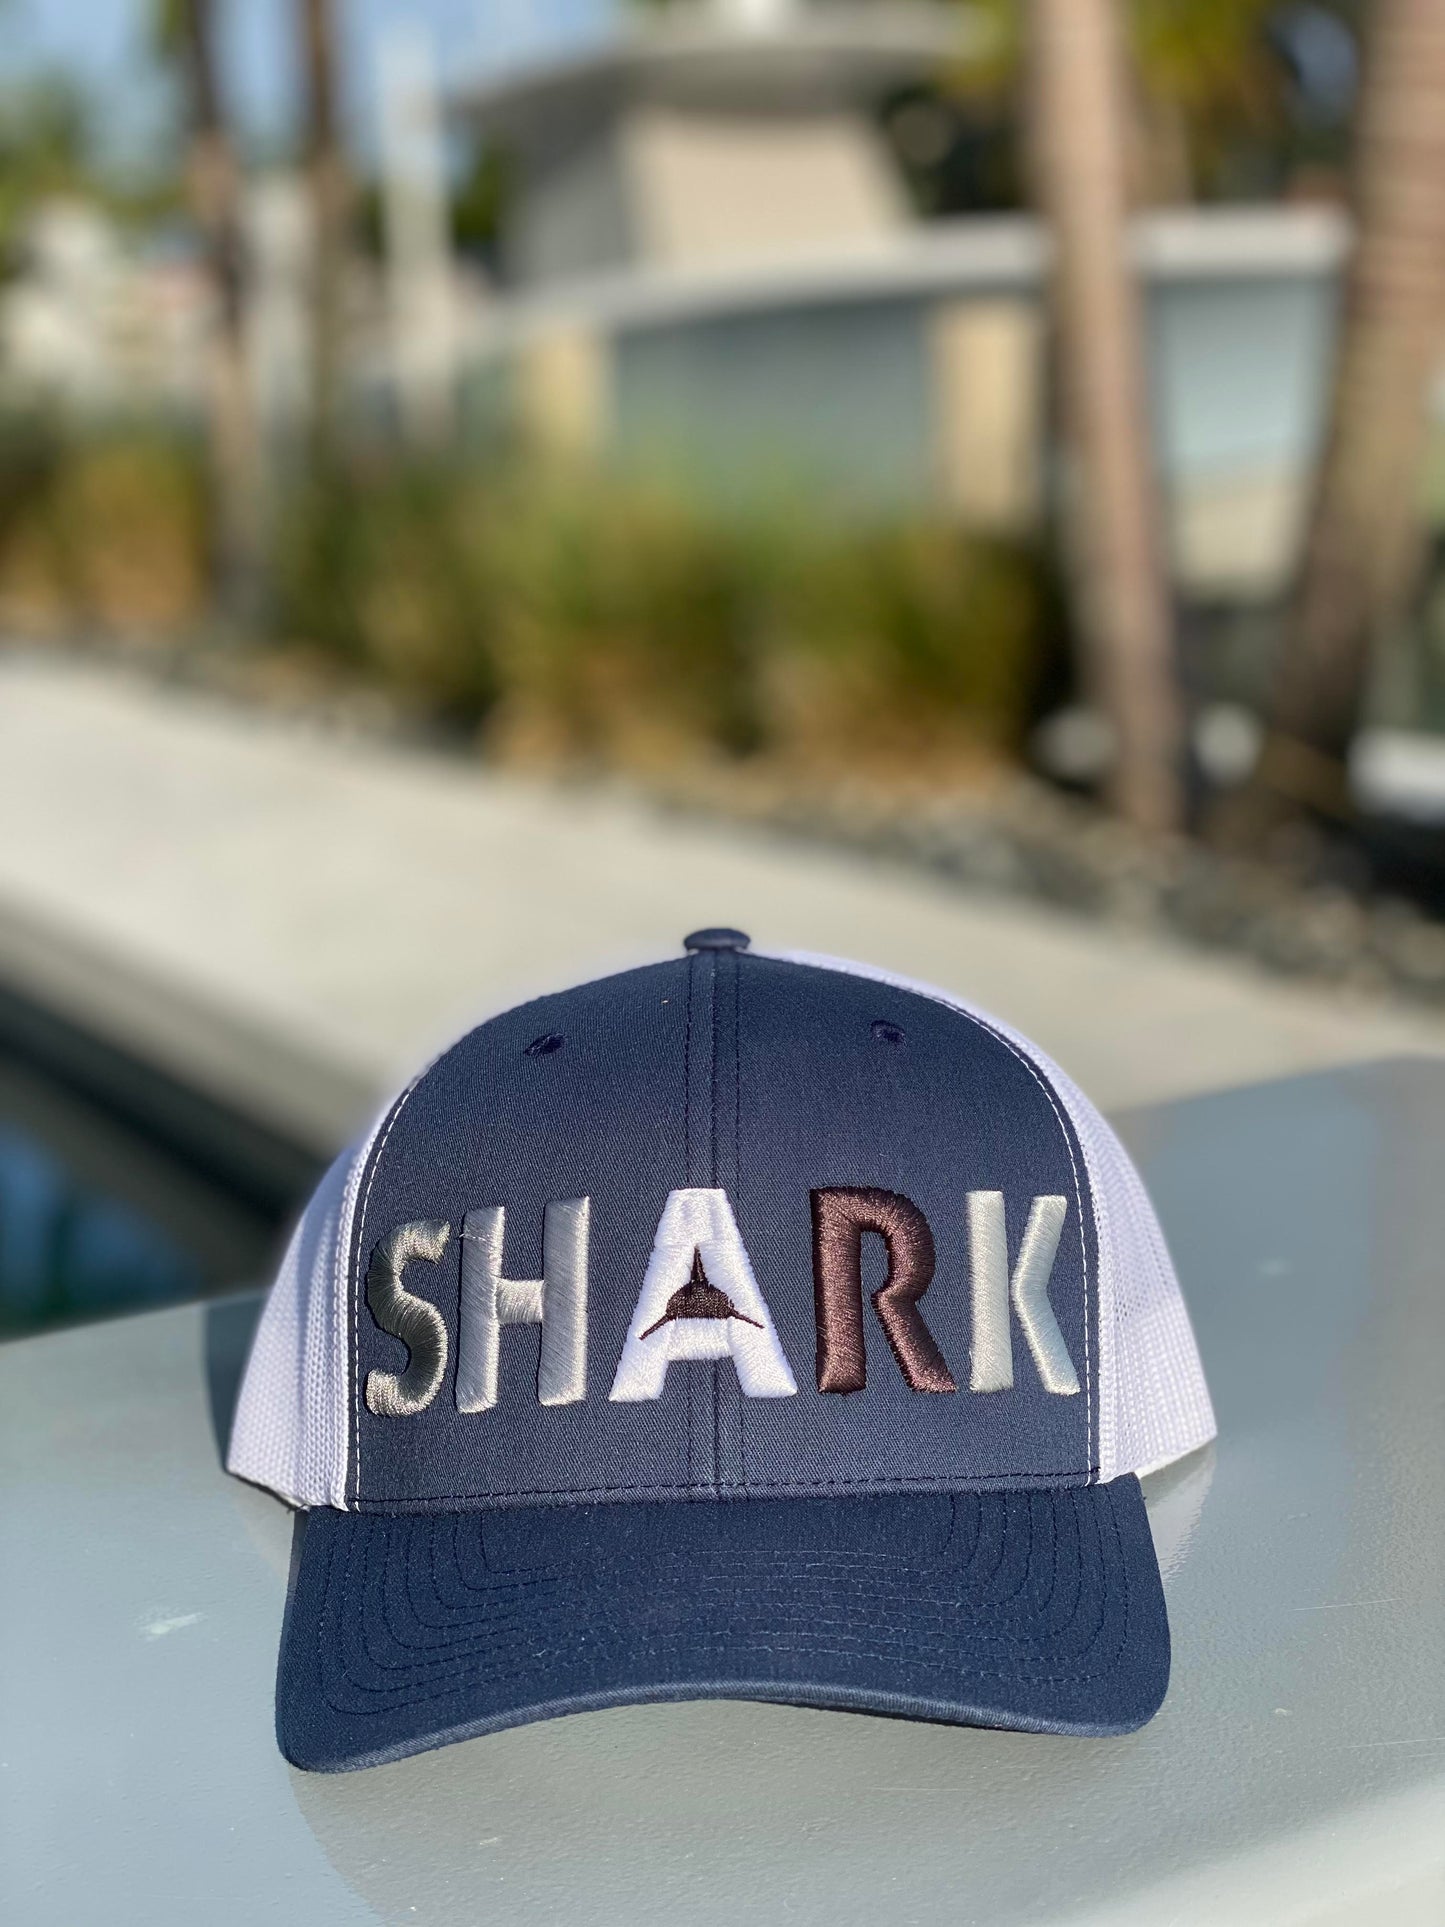 3d SHARK Hat in White (Shark Week Limited Edition)